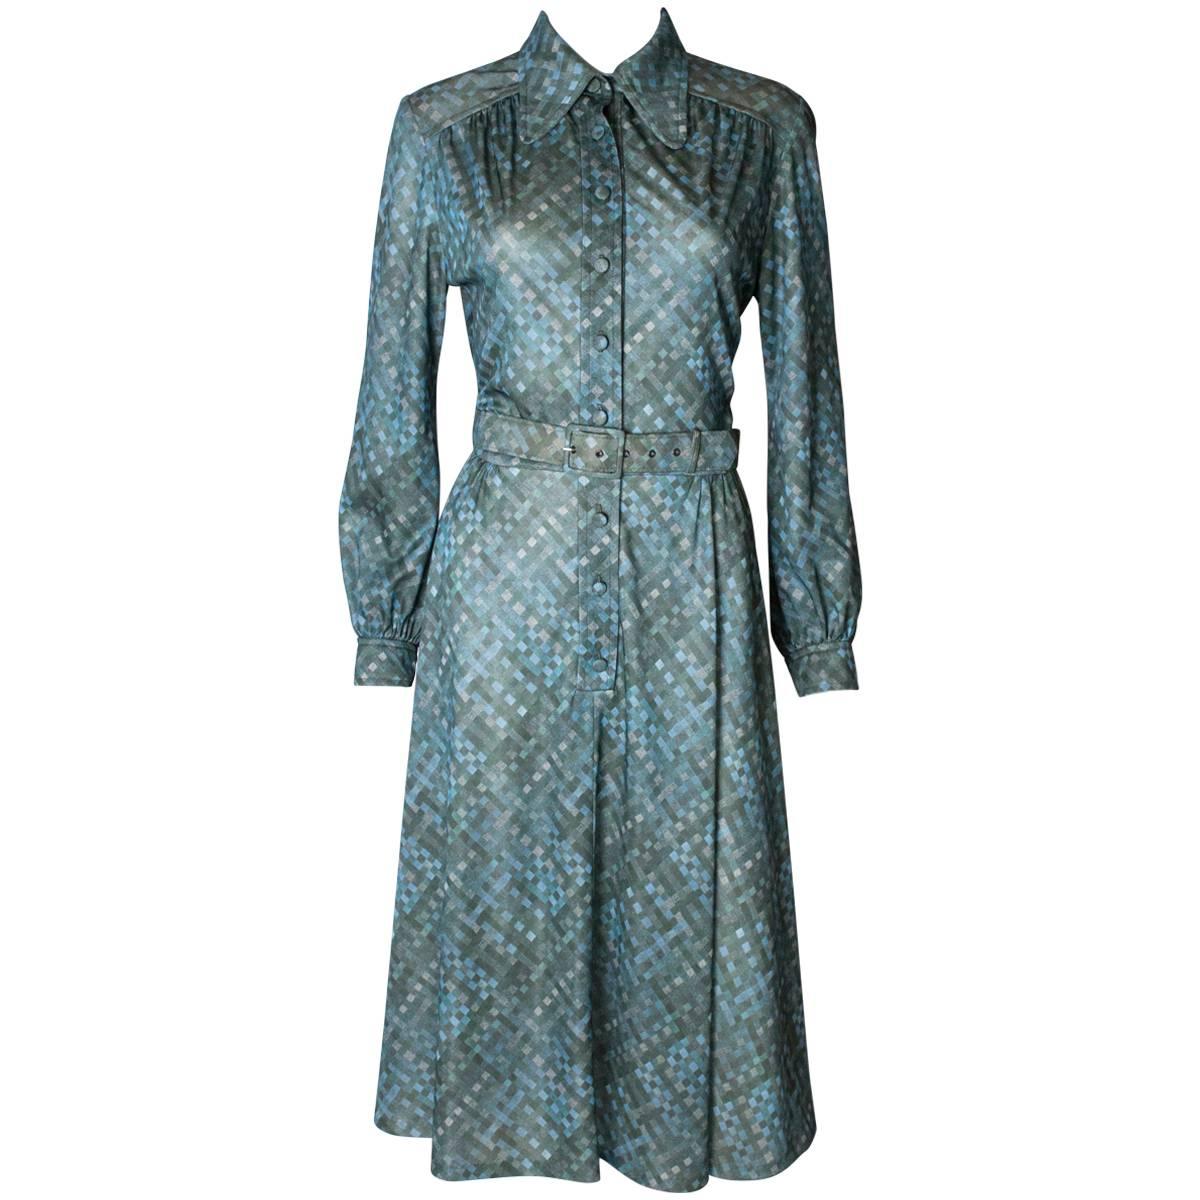 A vintage 1970s green printed day dress by Carnegie London 